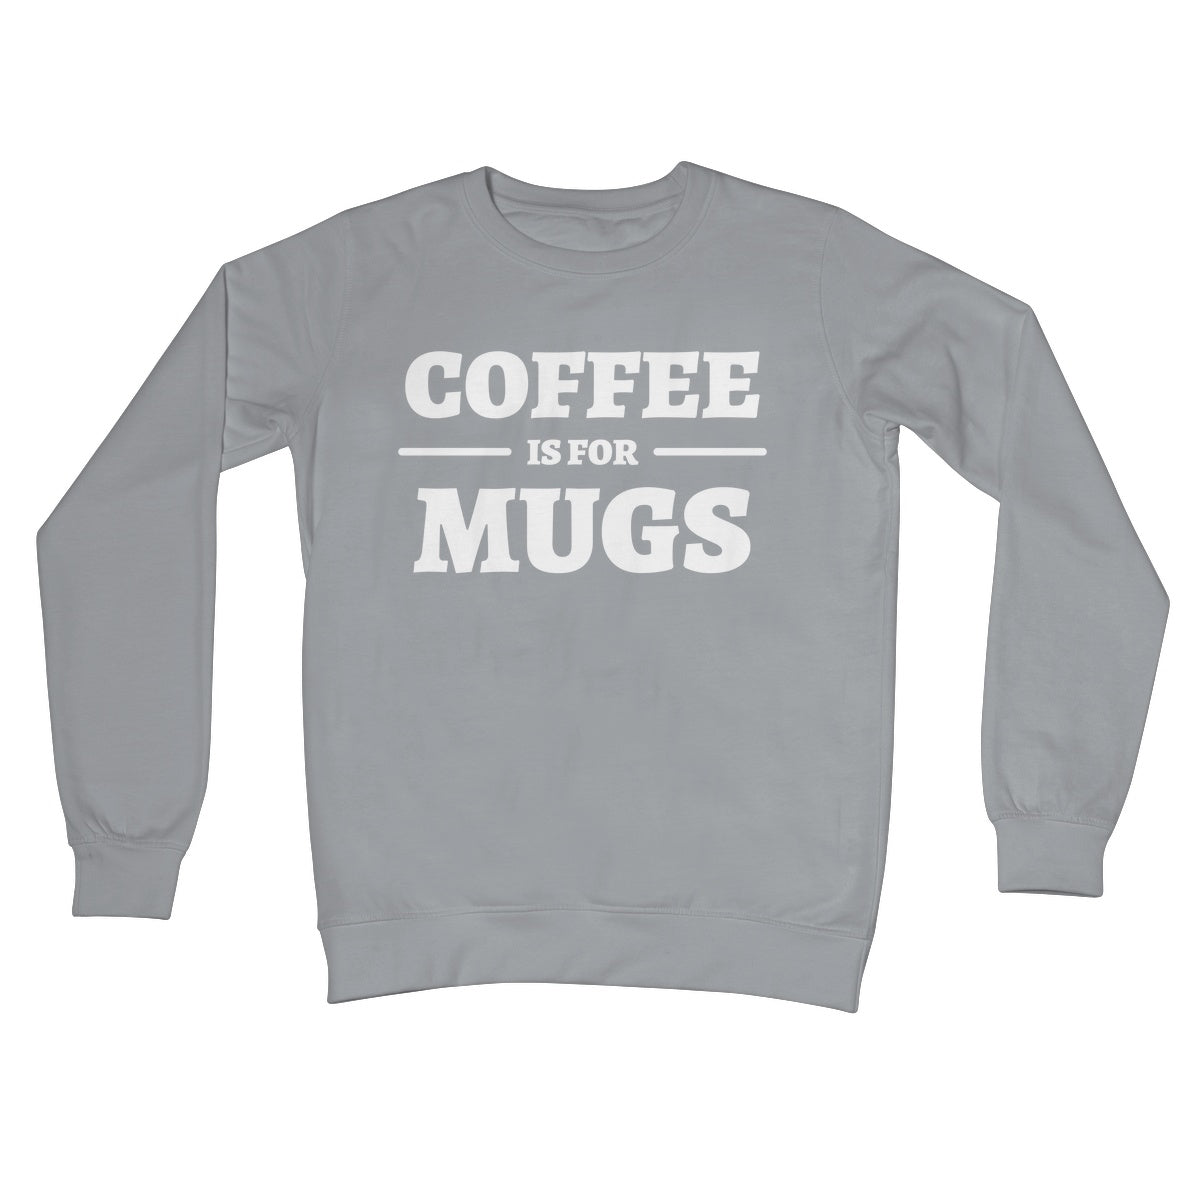 coffee is for mugs jumper grey